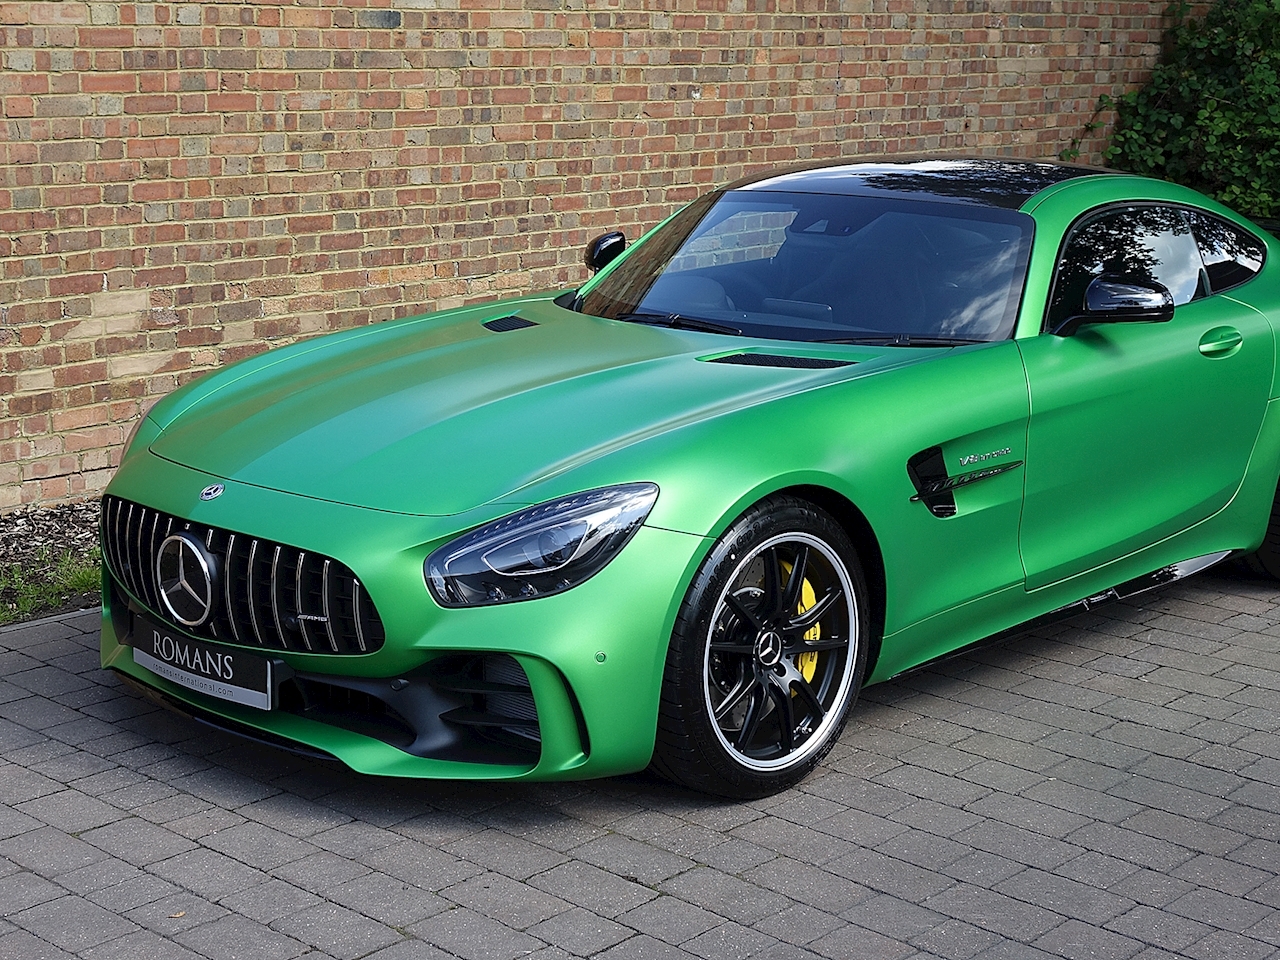 2017 Used Mercedes Benz Amg Gt R Amg Green Hell Magno